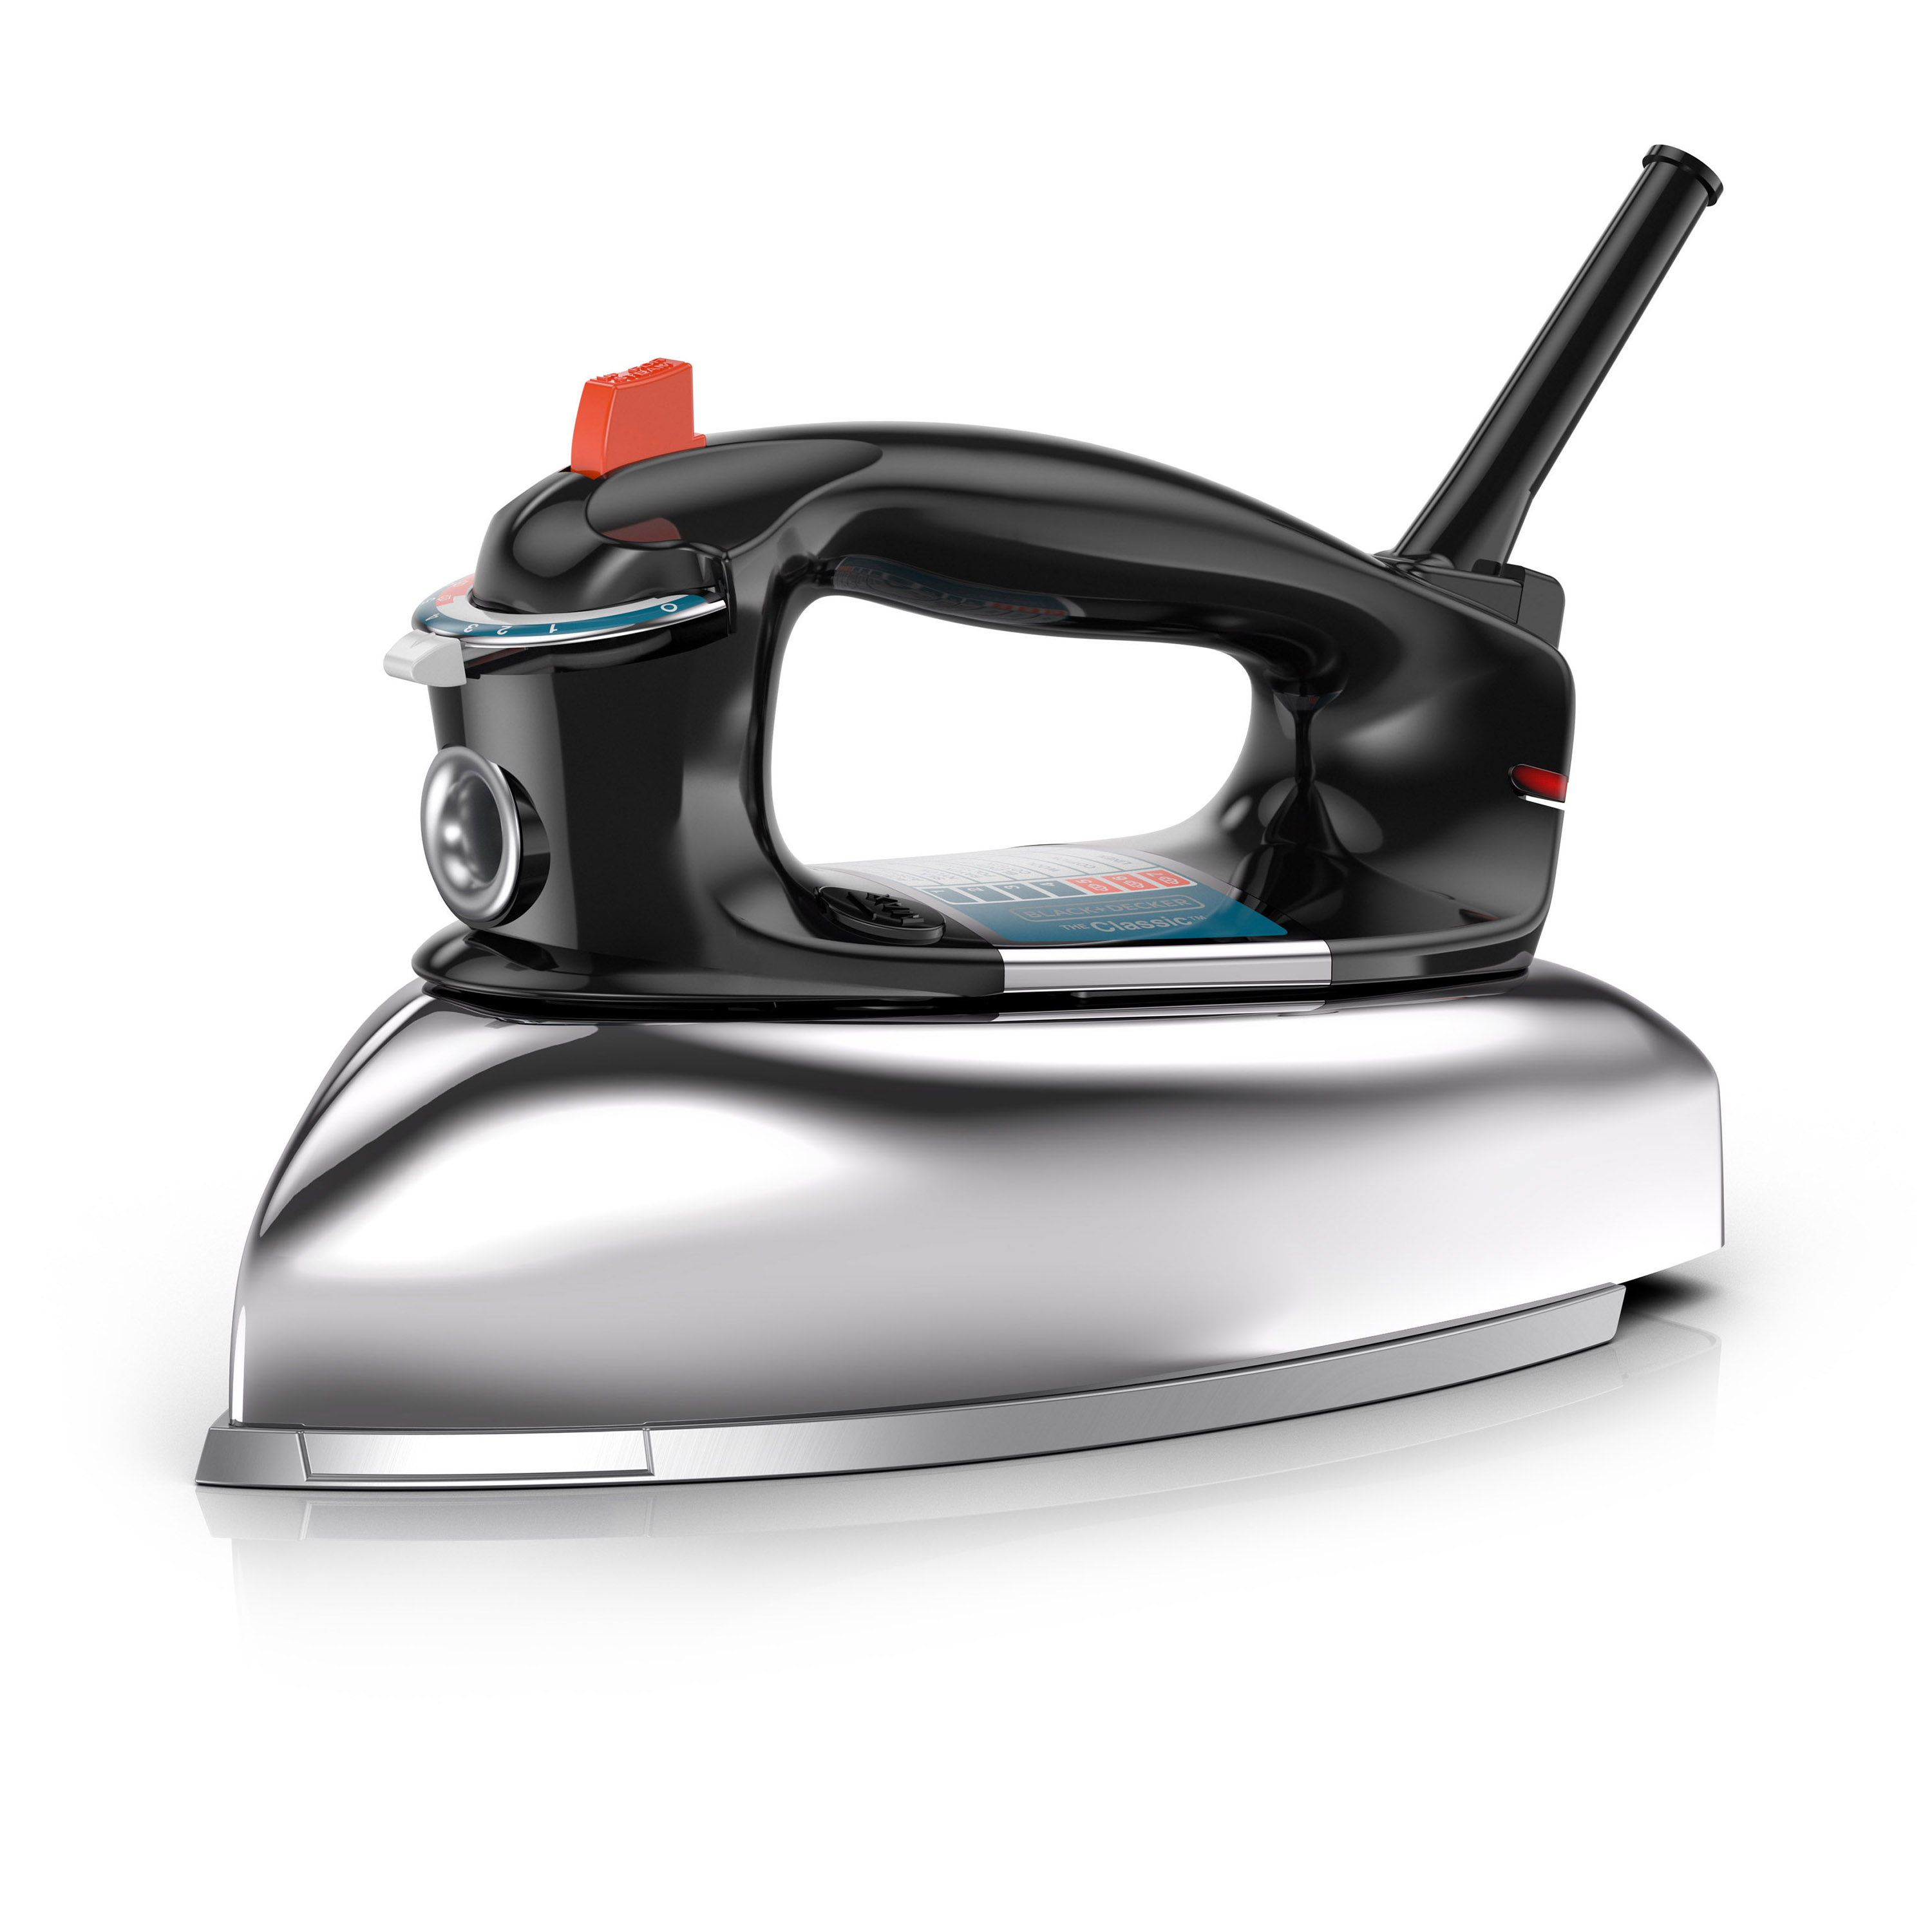 BLACK+DECKER Classic Iron with Aluminum Soleplate, Silver, F67E - image 1 of 11